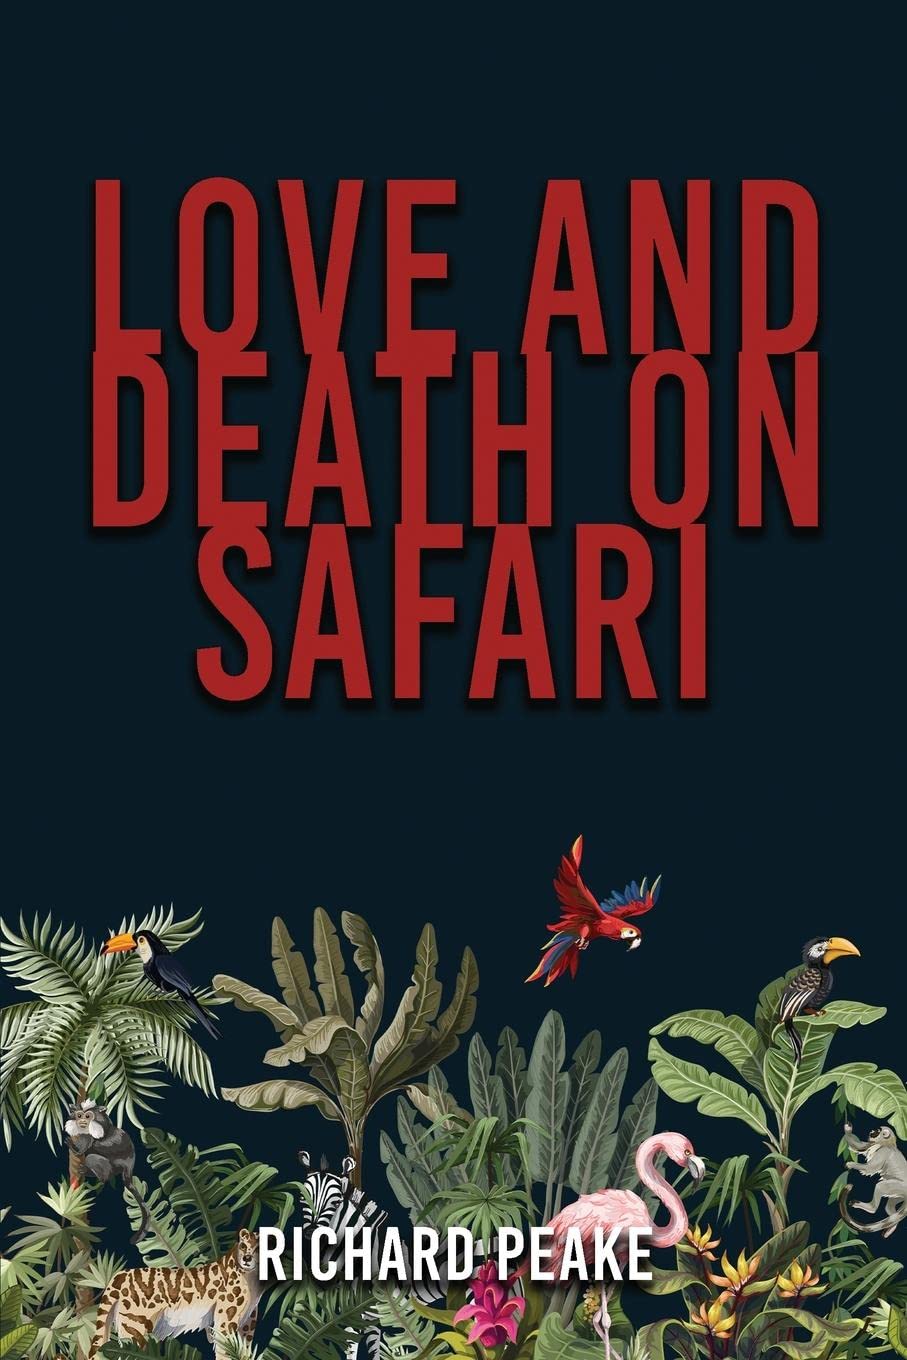 Love and Death on Safari by R H Peake Published by Author’s Tranquility Press